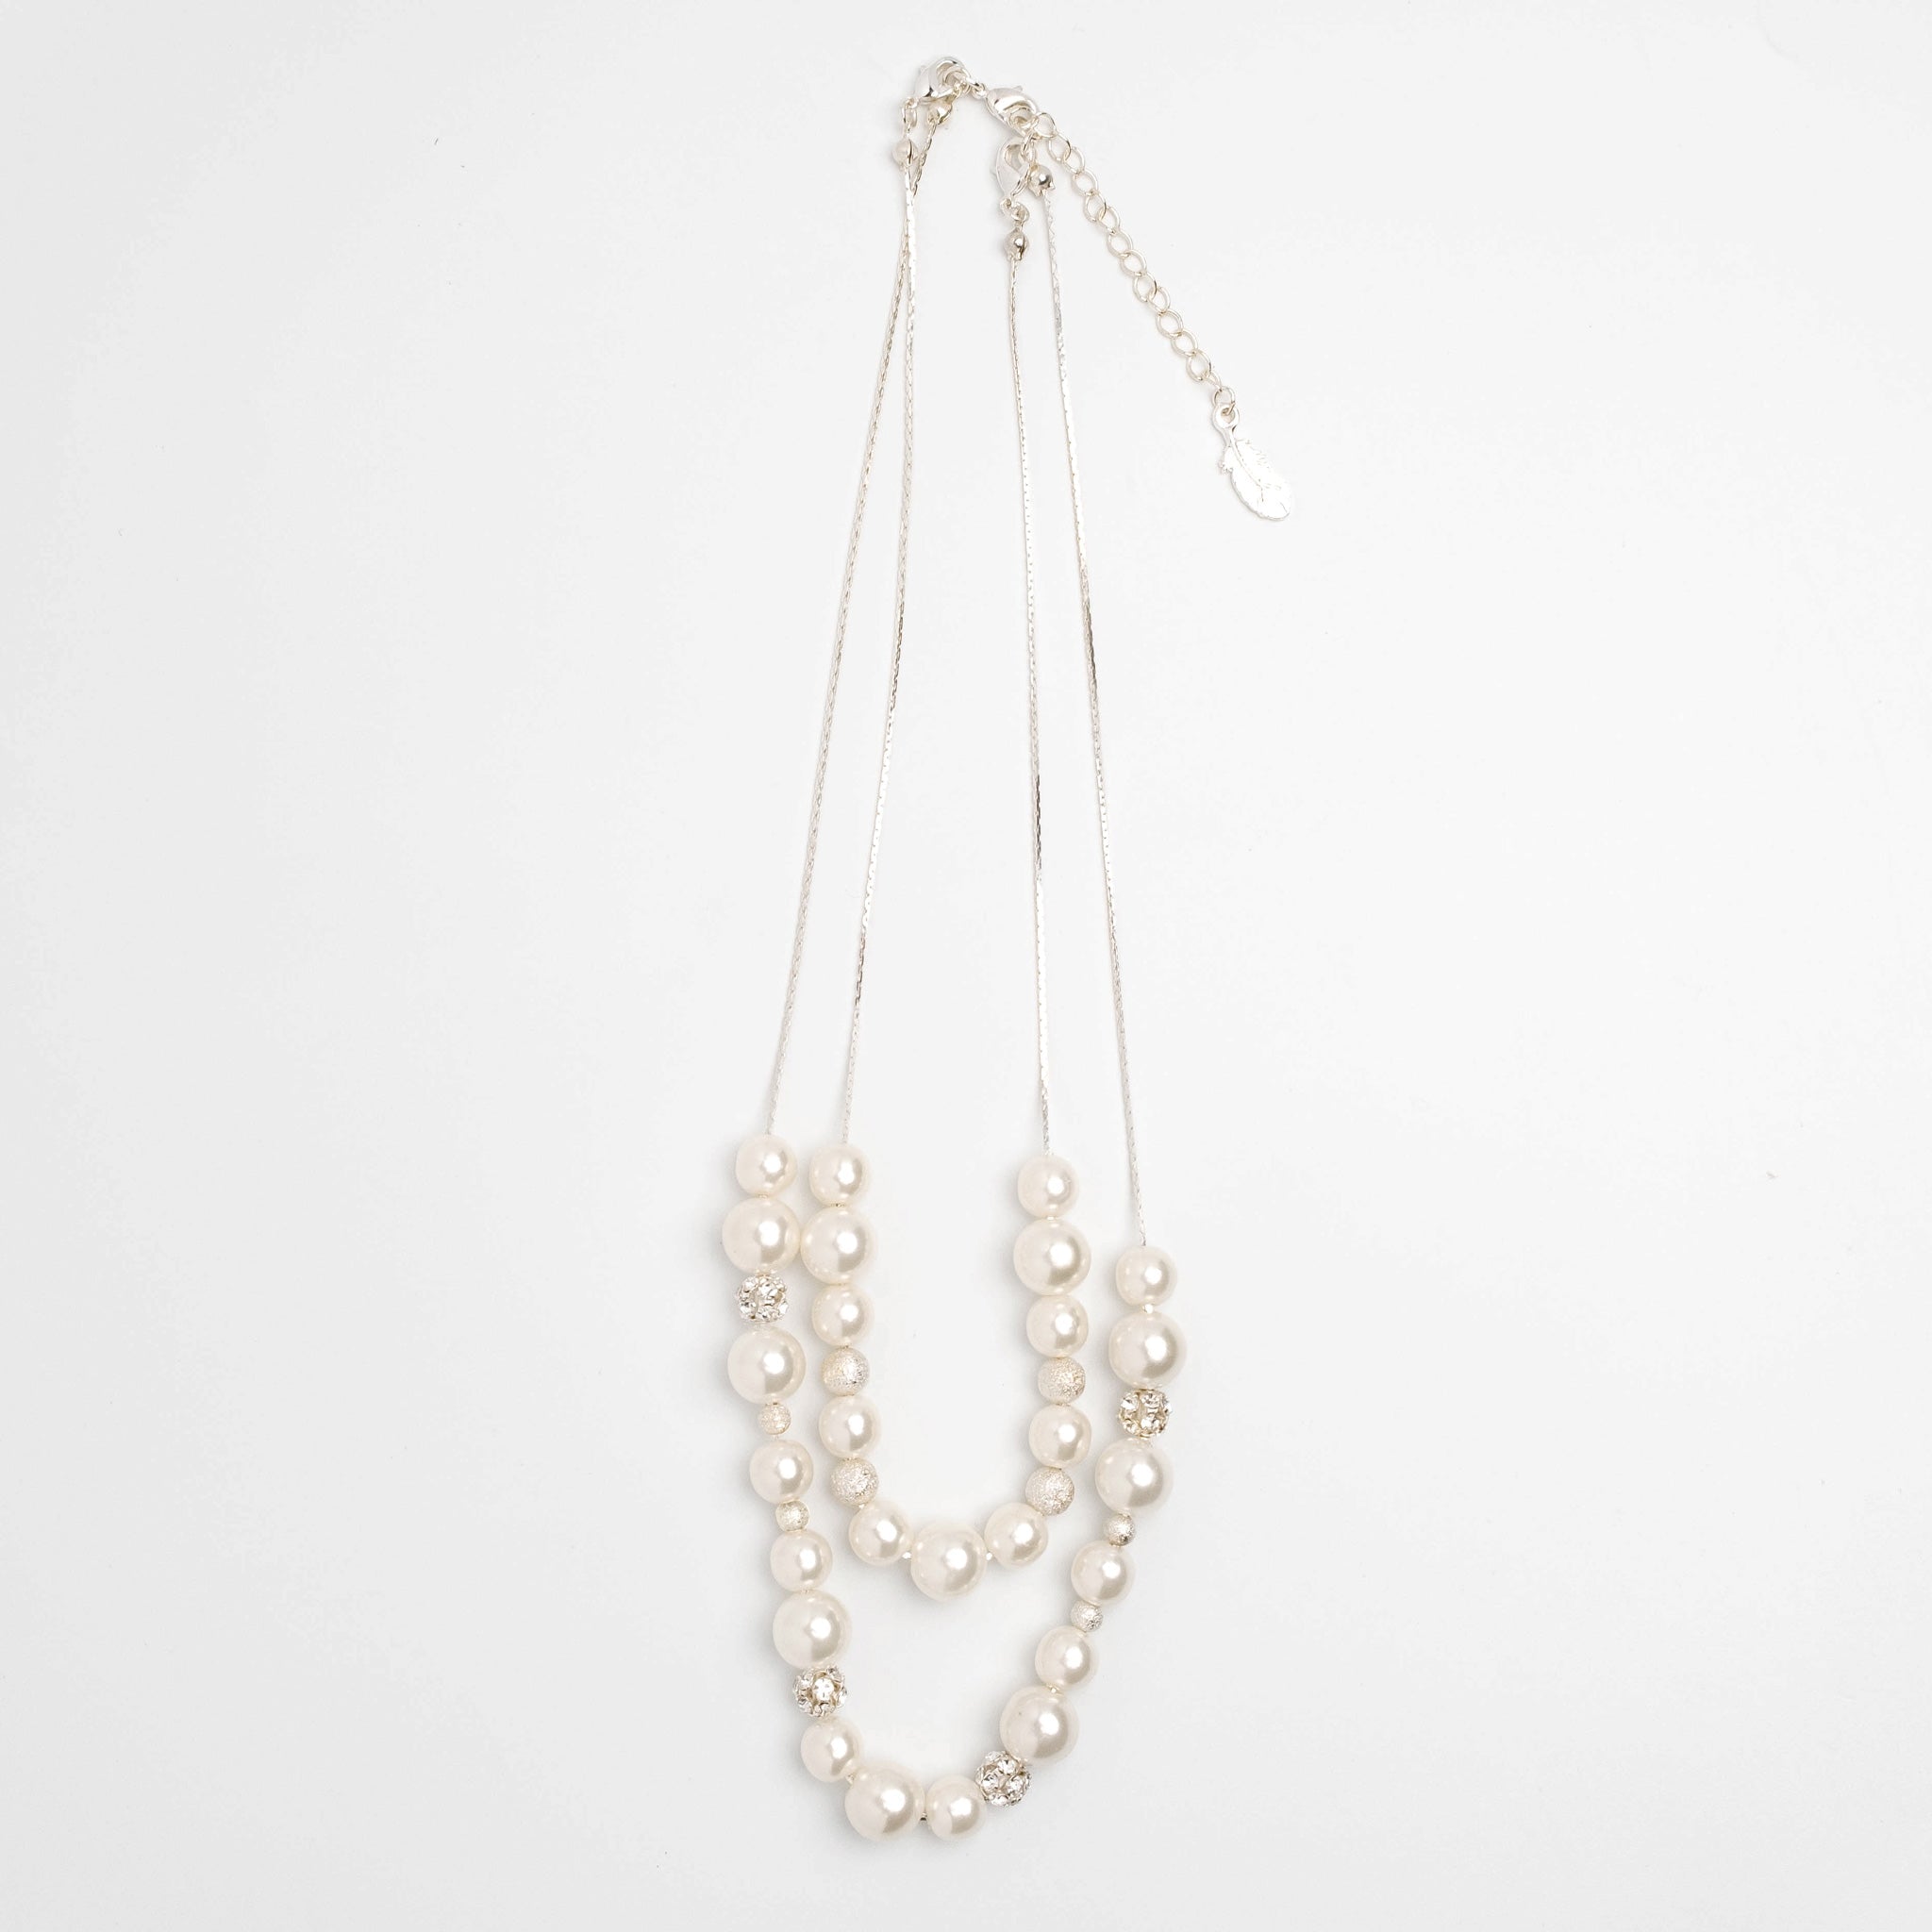 2 pearl x dust ball necklace